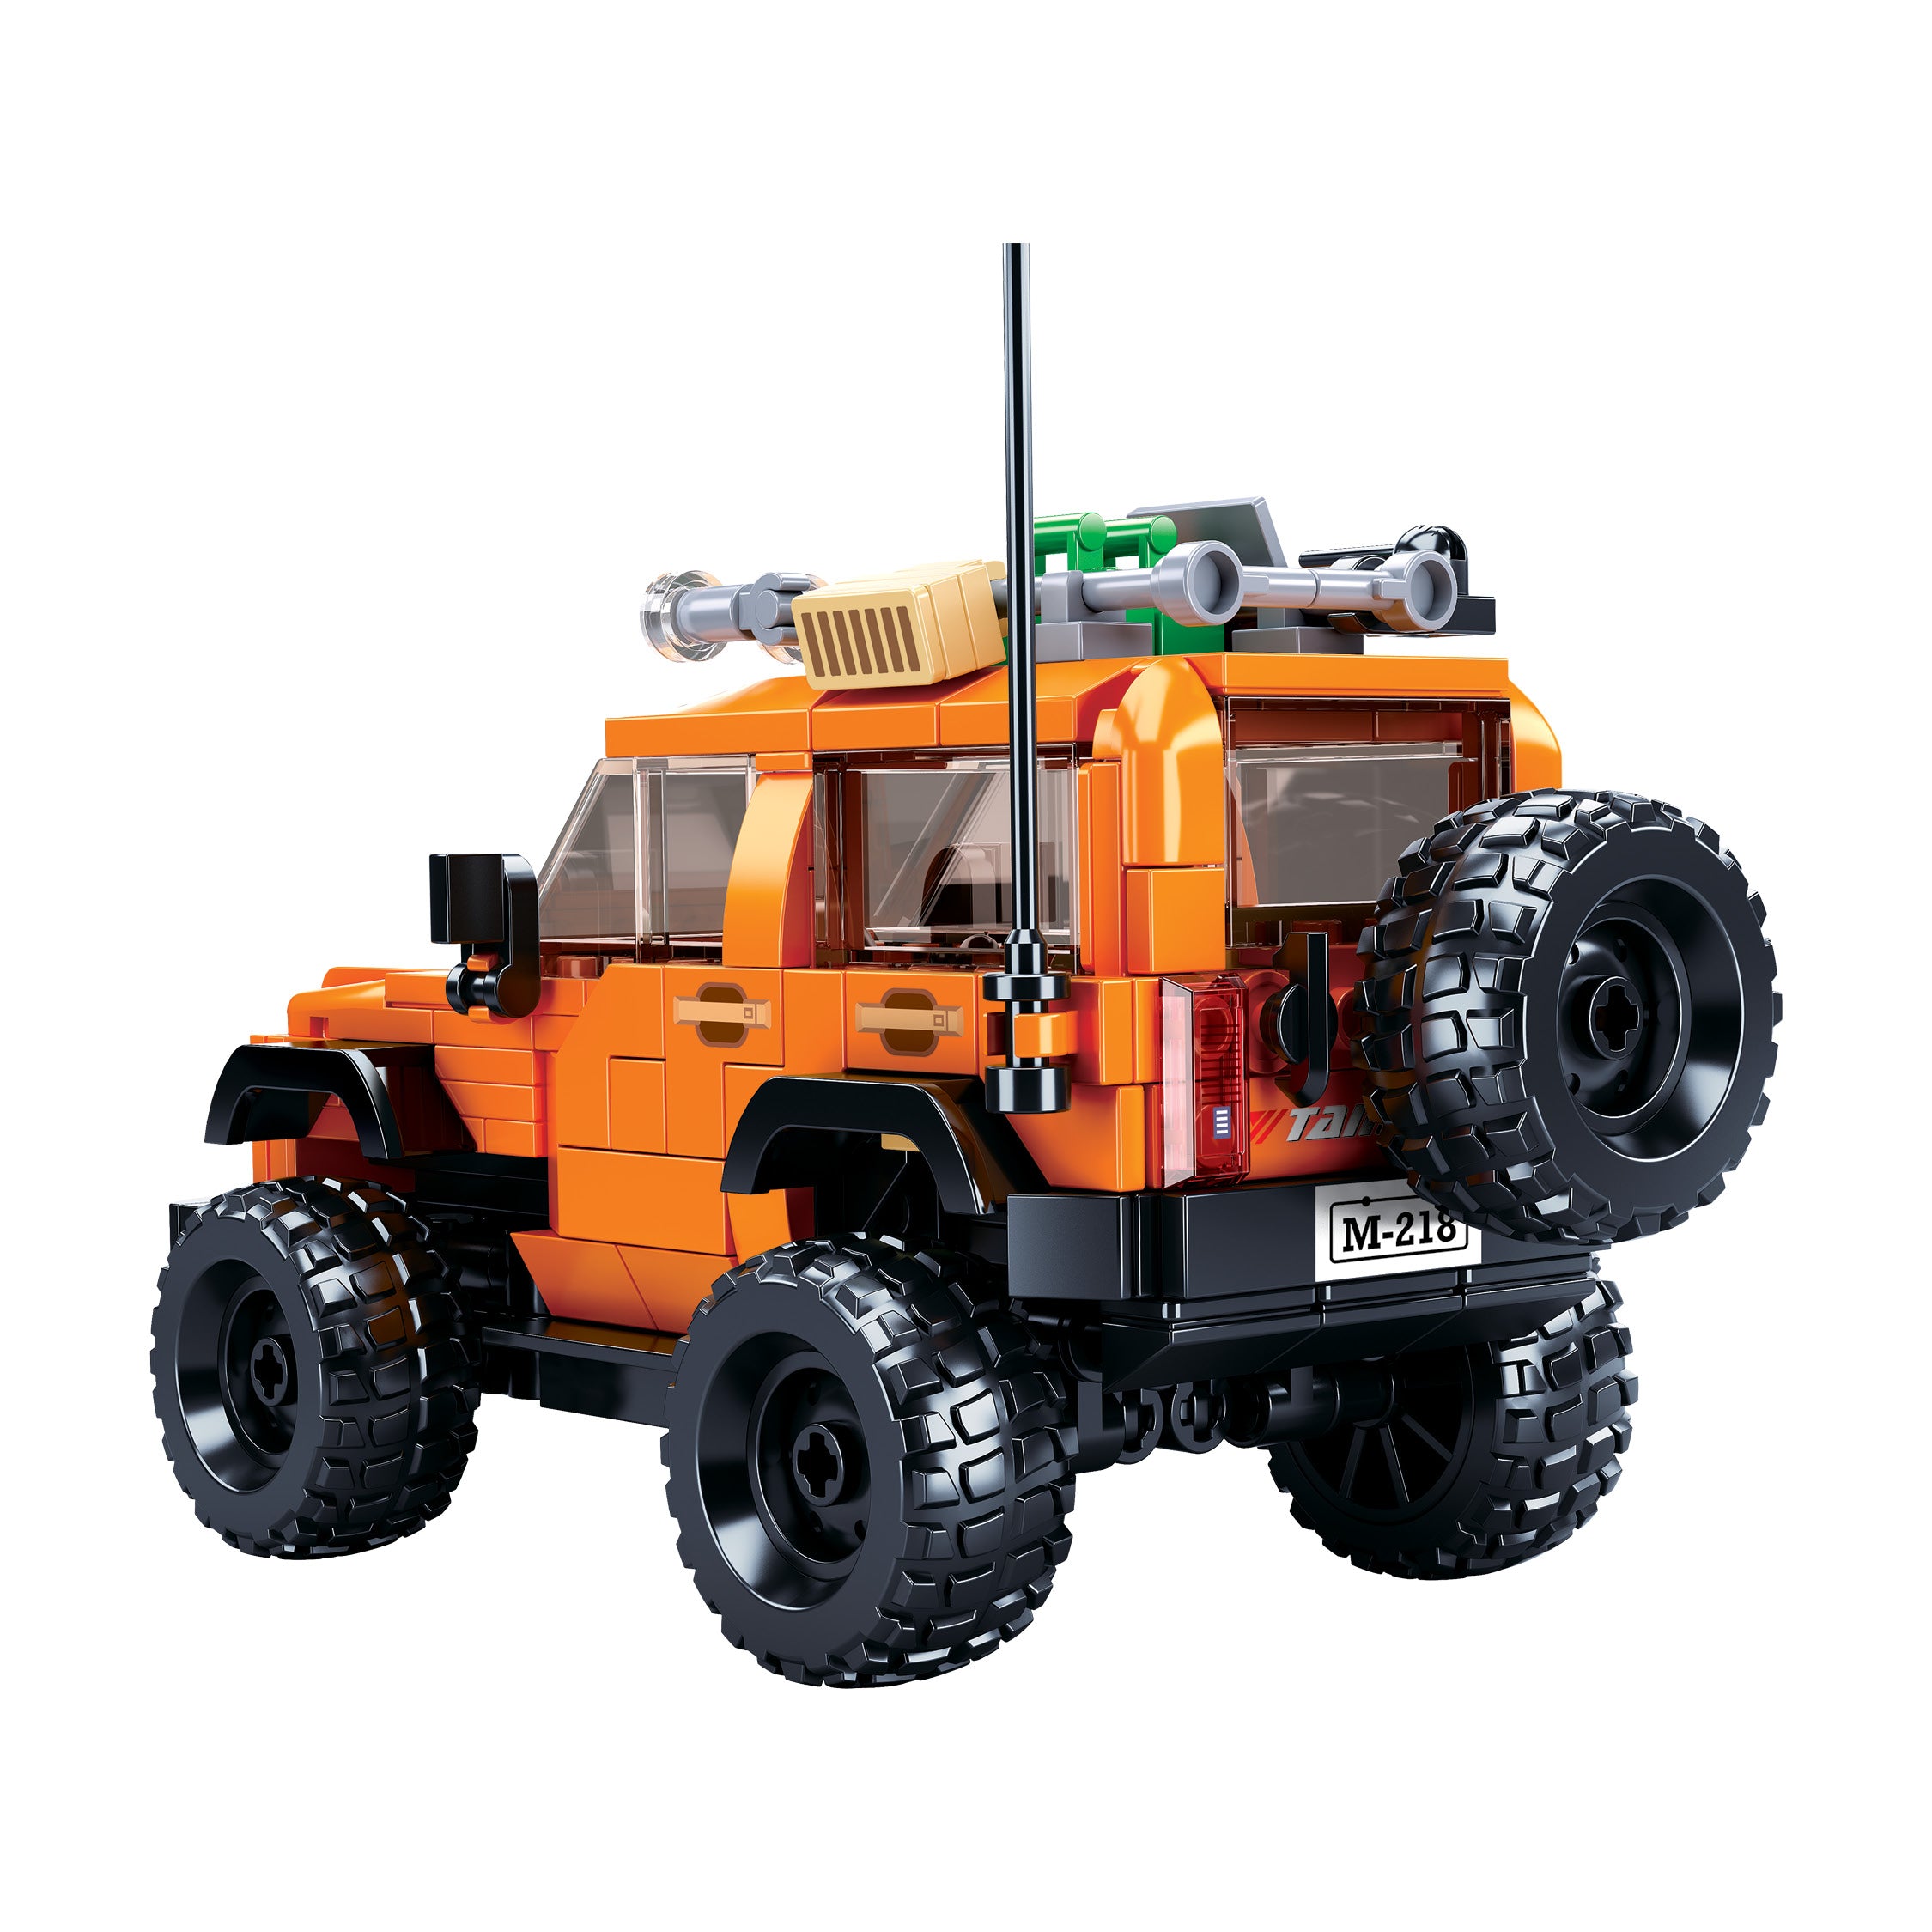 Sluban® Modelbricks-Tank 300 Suv (M38-B1013) (302 Pcs) Building Blocks Kit For Boys And Girls Aged 8 Years And Above Creative Construction Set Educational Stem Toy, Blocks Compatible With Other Leading Brands, Bis Certified.